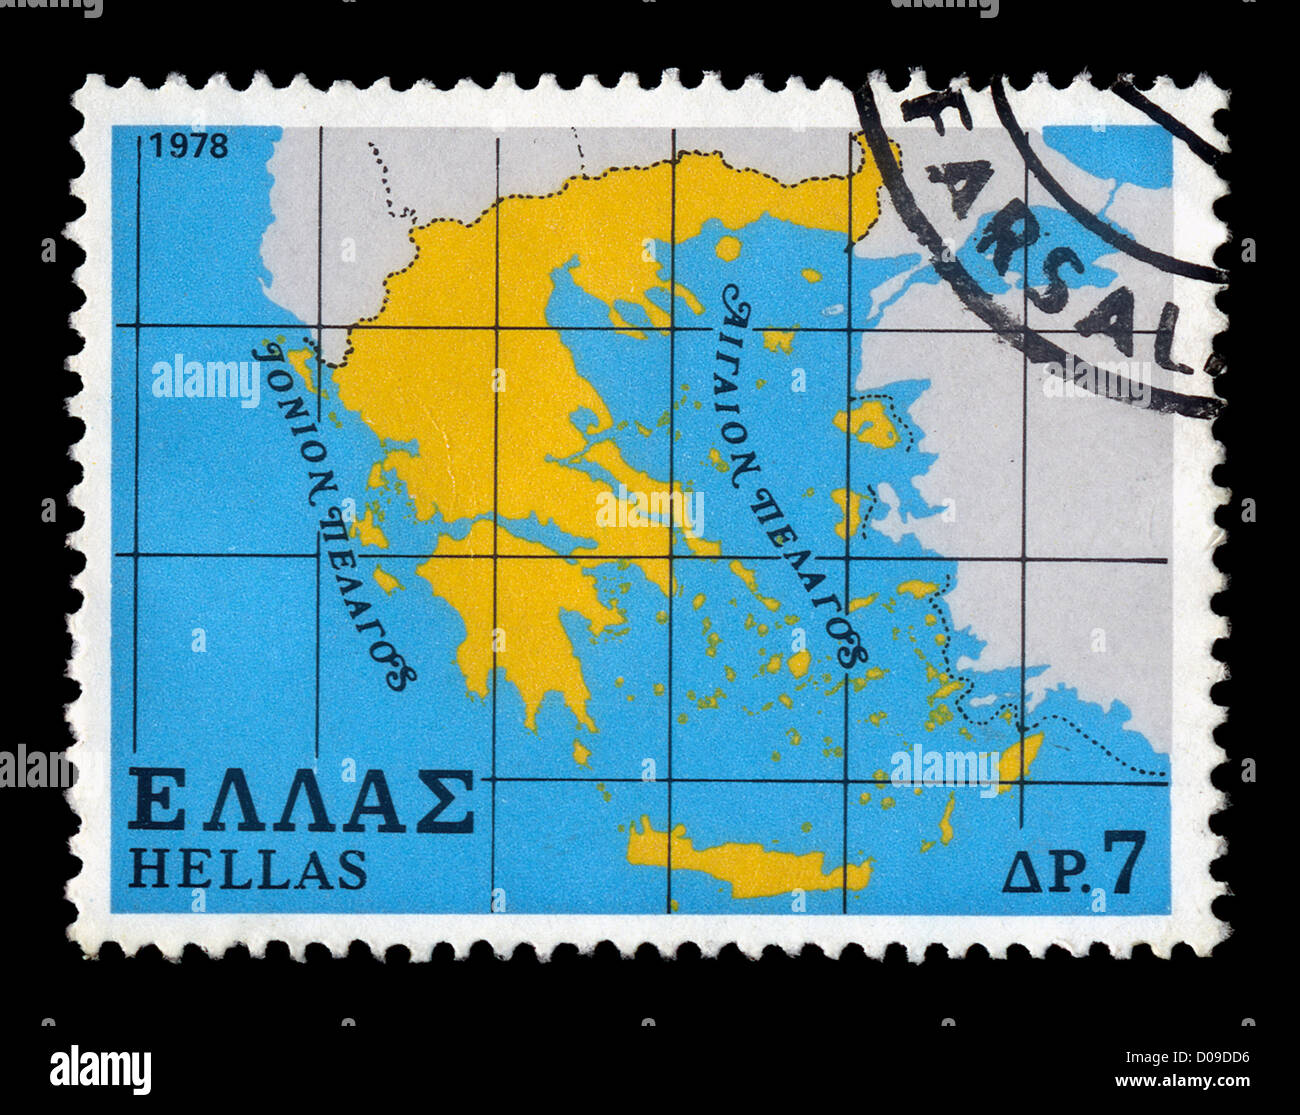 Vintage canceled postage stamp with map of Greece illustration, circa 1978. Stock Photo